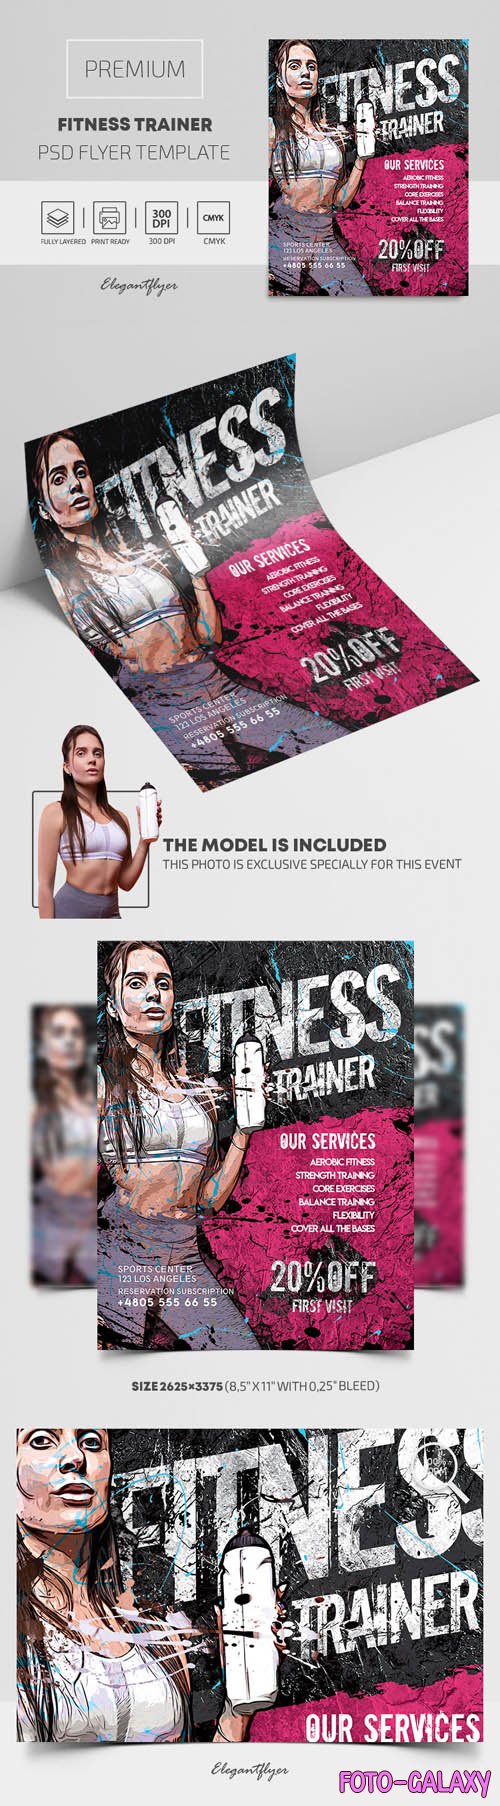 Fitness Trainer Premium PSD Flyer Template